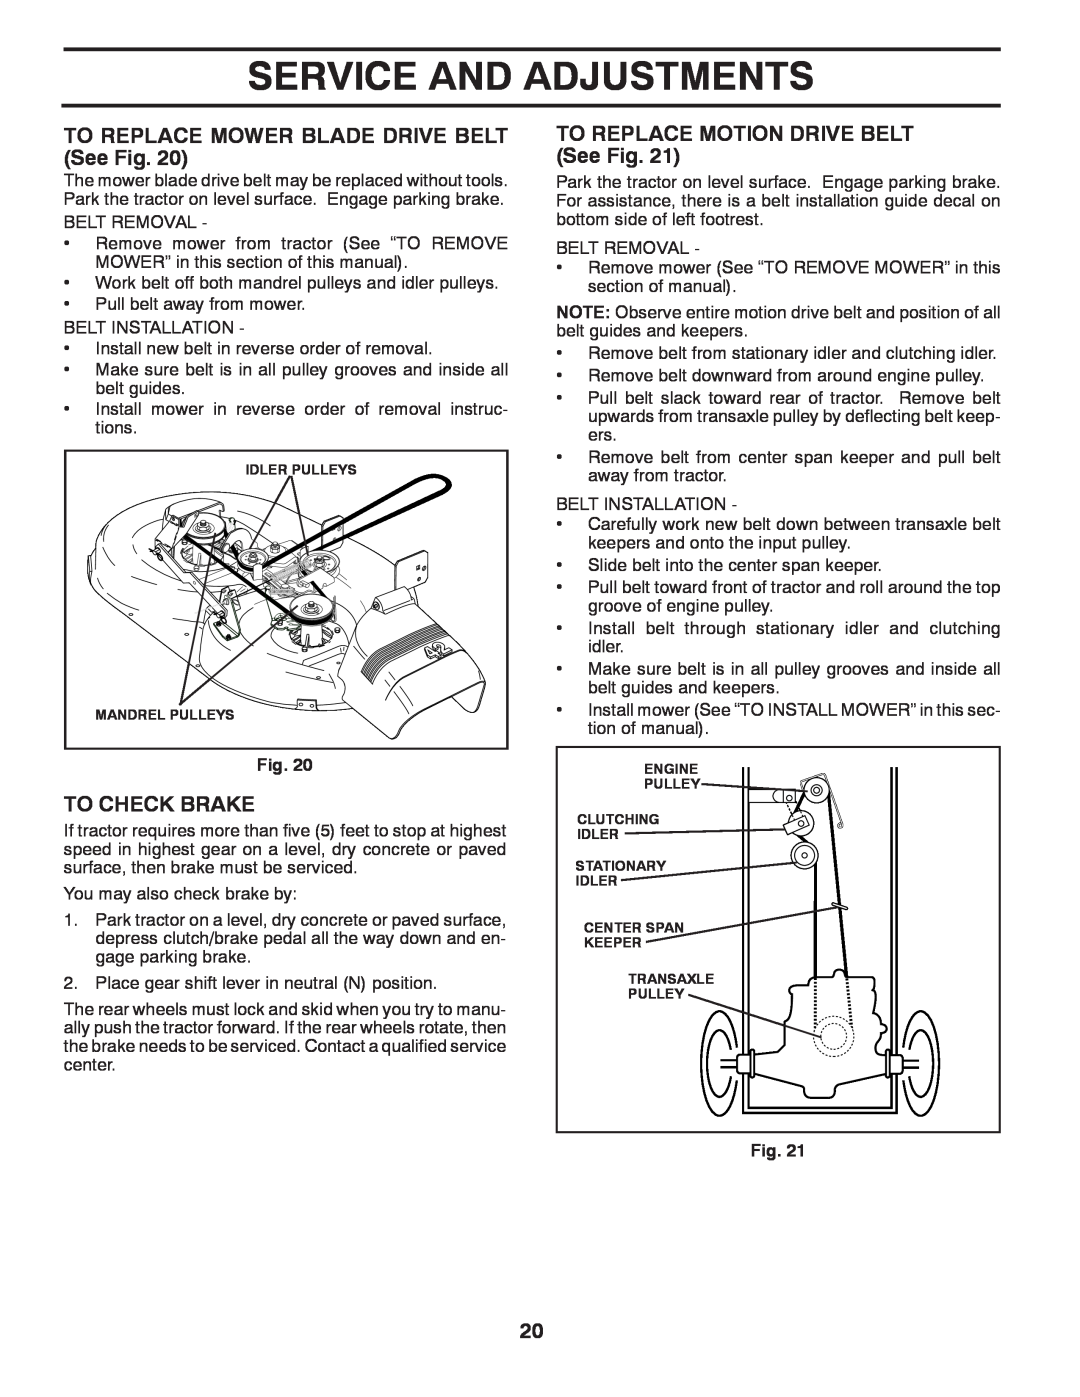 Poulan 96012011200, 438511 TO REPLACE MOWER BLADE DRIVE BELT See Fig, To Check Brake, TO REPLACE MOTION DRIVE BELT See Fig 